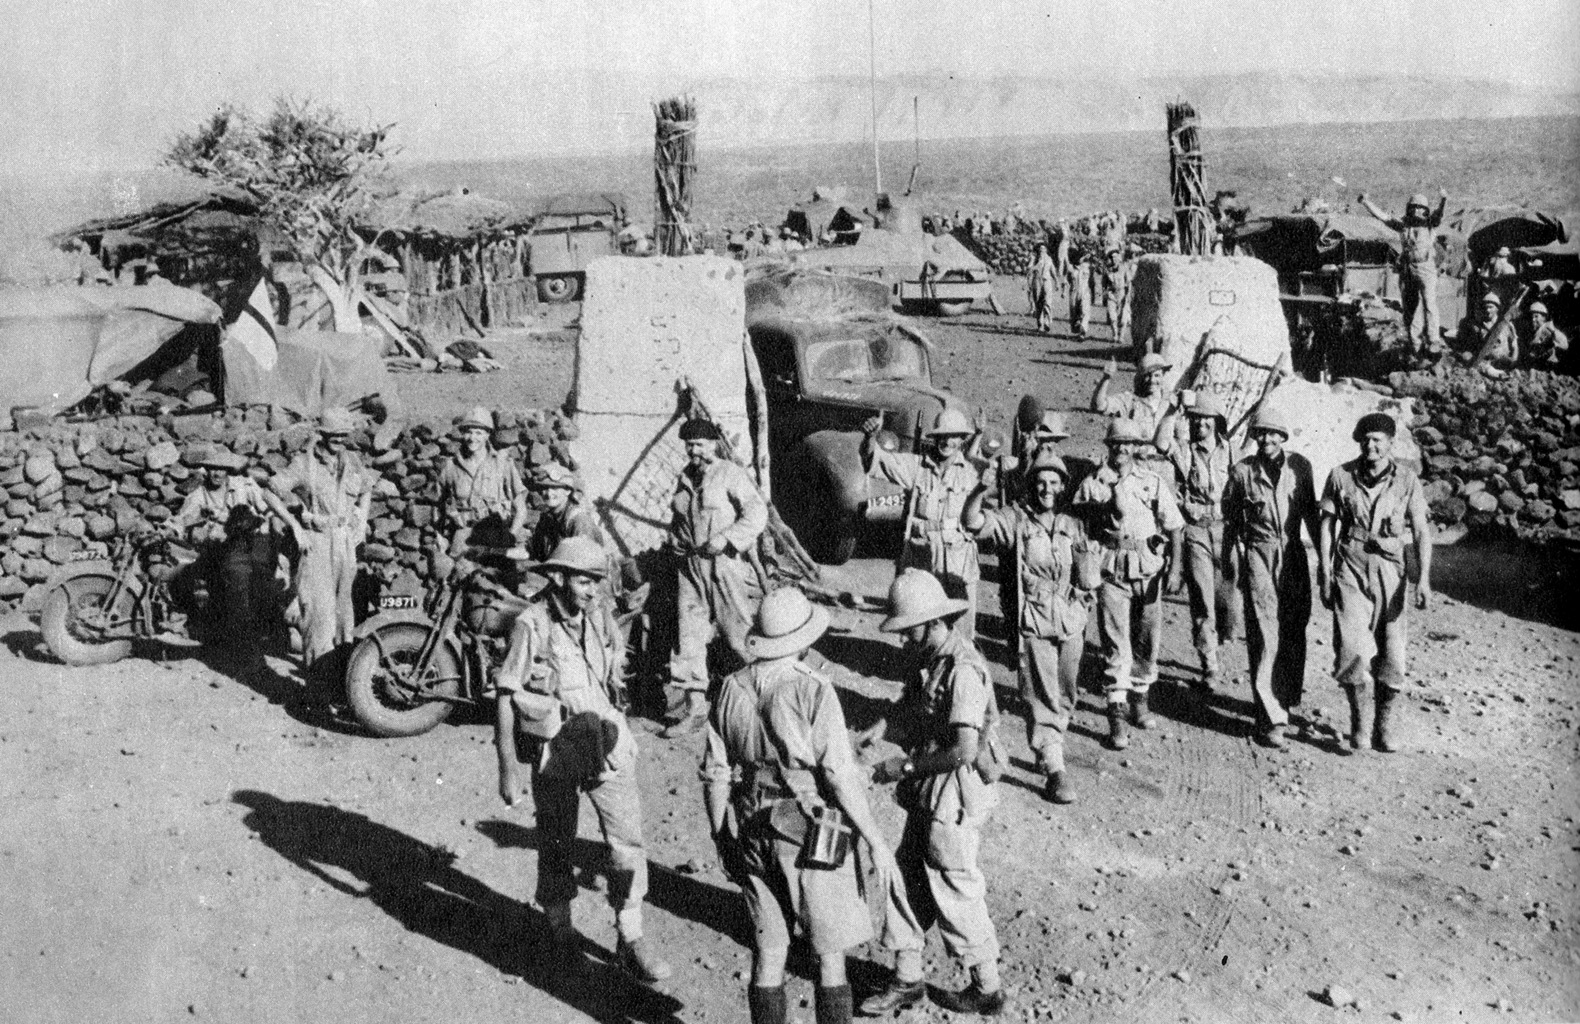 South African soldiers celebrate the capture of Hobok Fort in Abyssinia from Italian forces, February 1941.